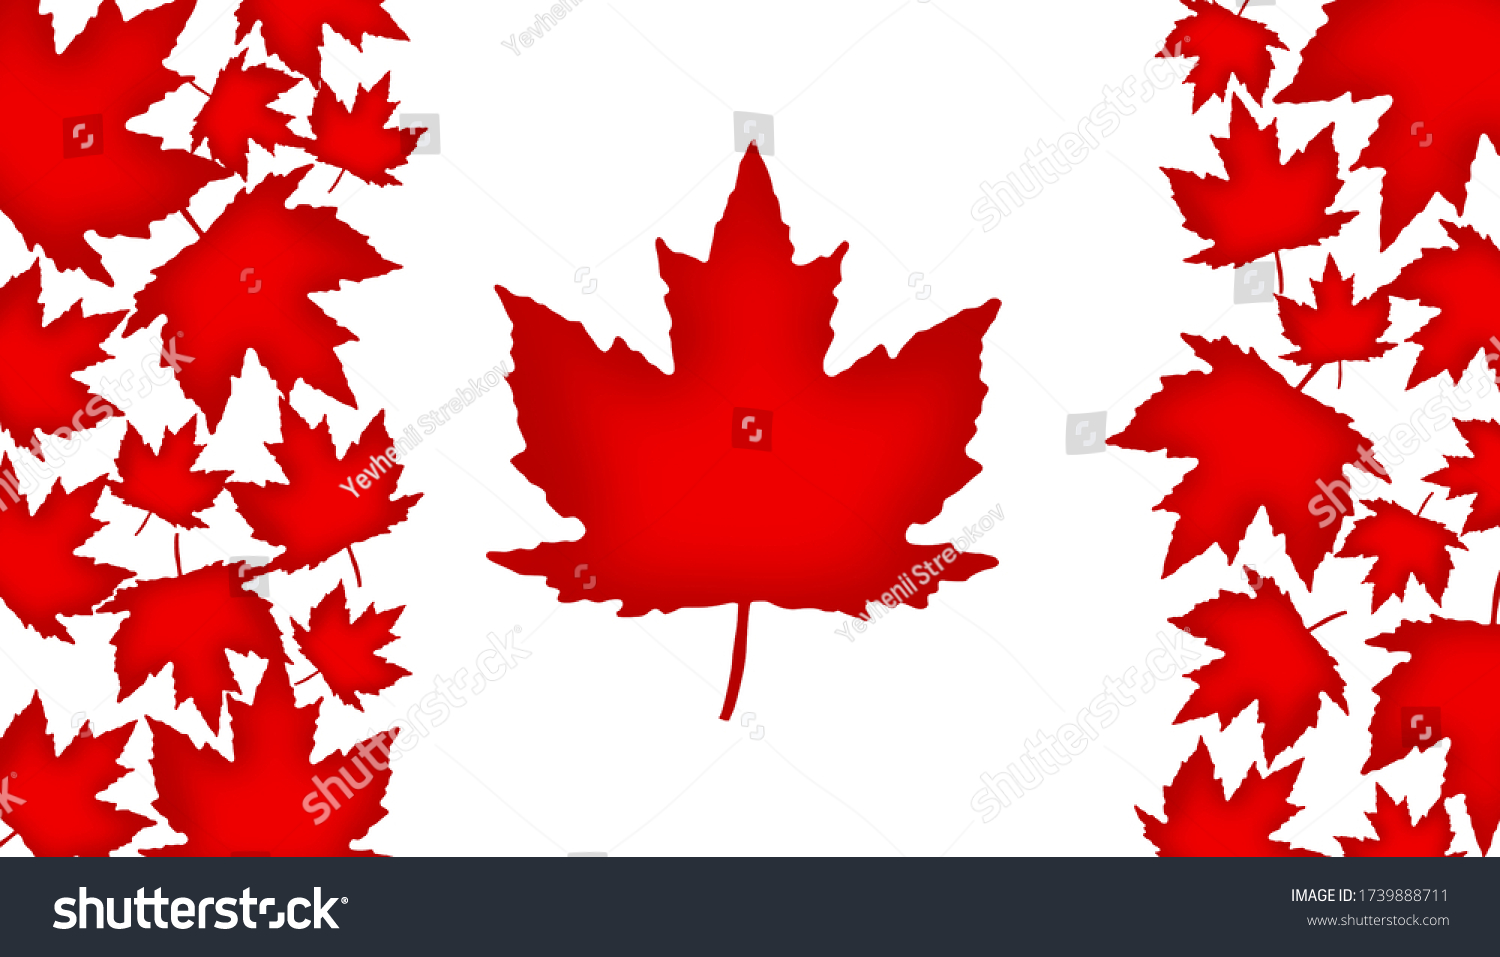 Canada Maple Leaf White Red Leaves Stock Photo 1589553025 